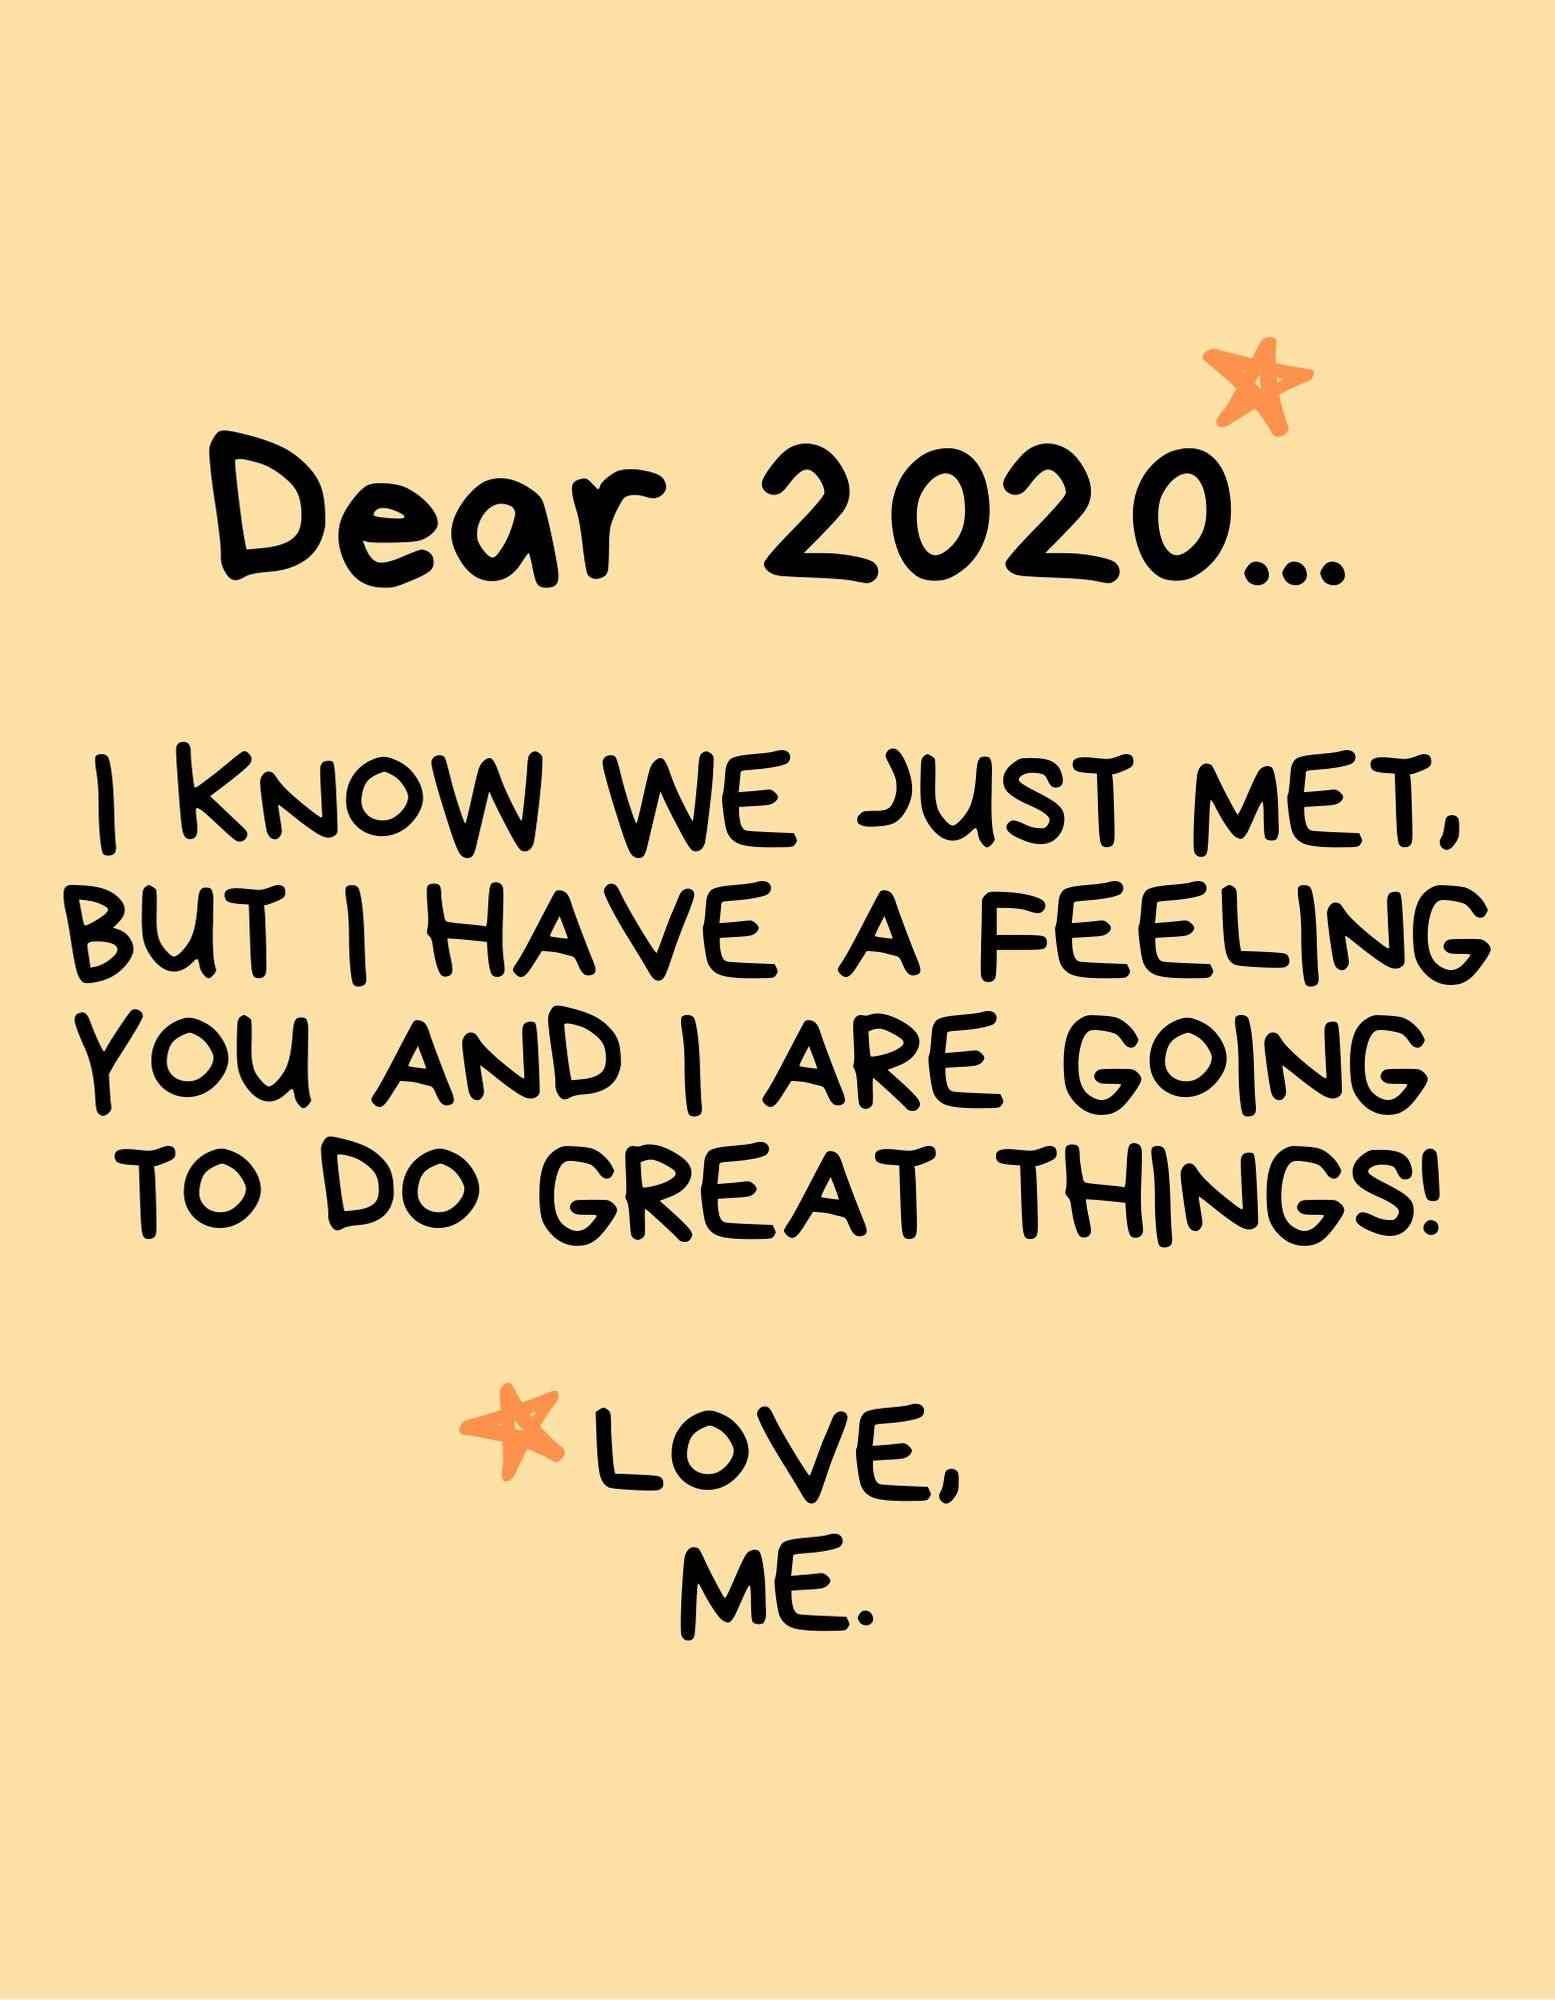 2020 New Year Quotes
 Starting the new year right quotes 2020 Dear 2020 I know